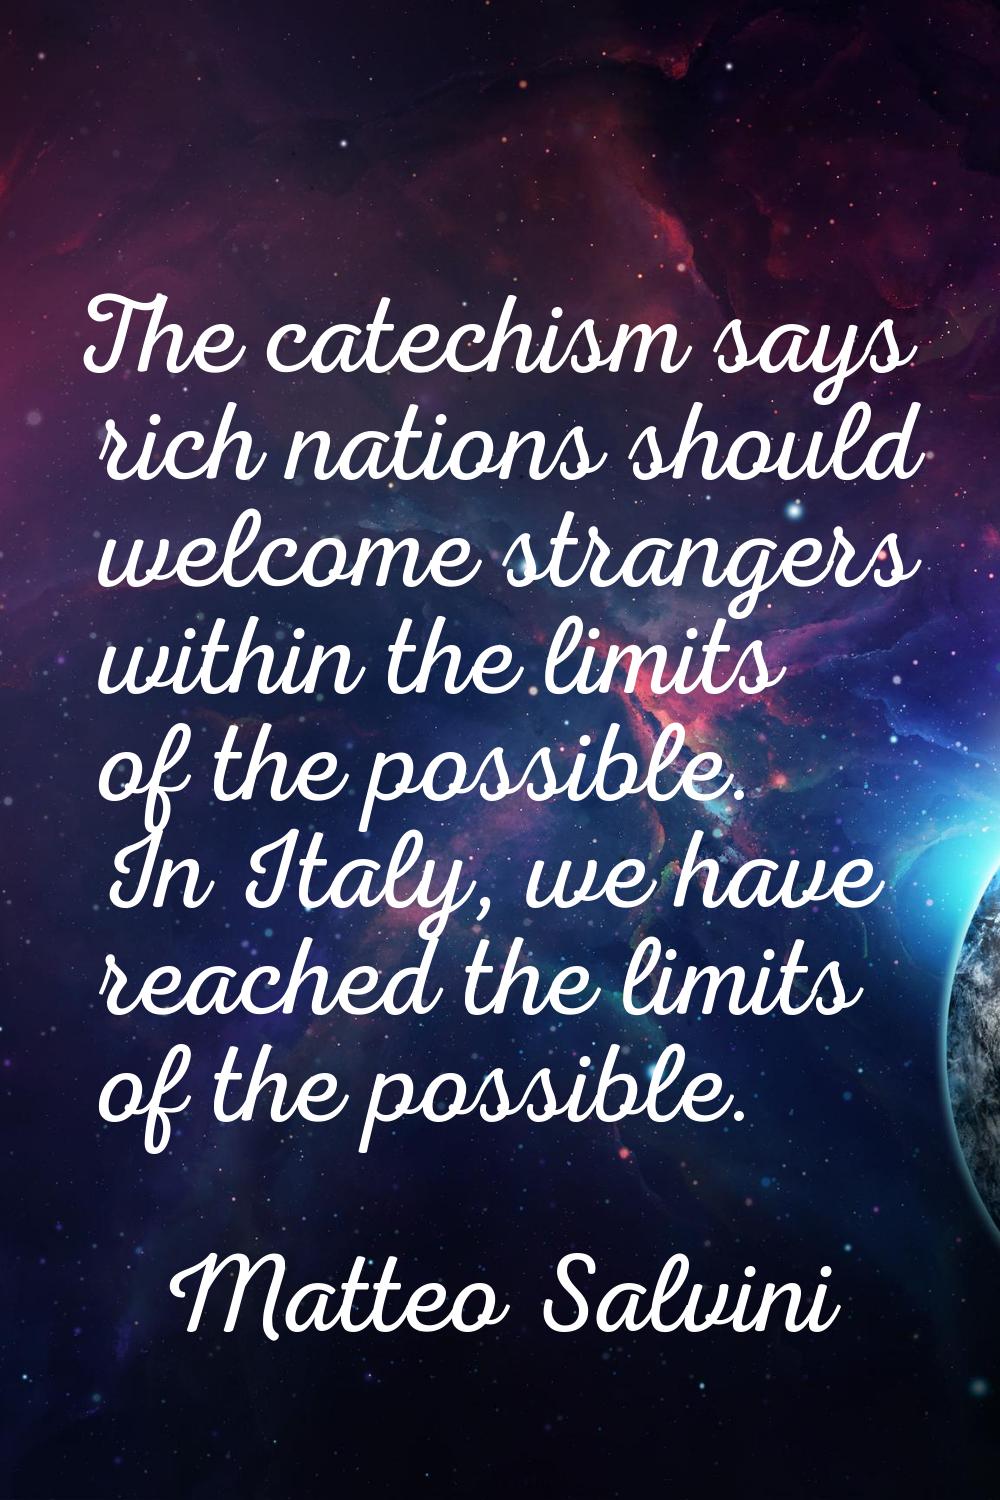 The catechism says rich nations should welcome strangers within the limits of the possible. In Ital